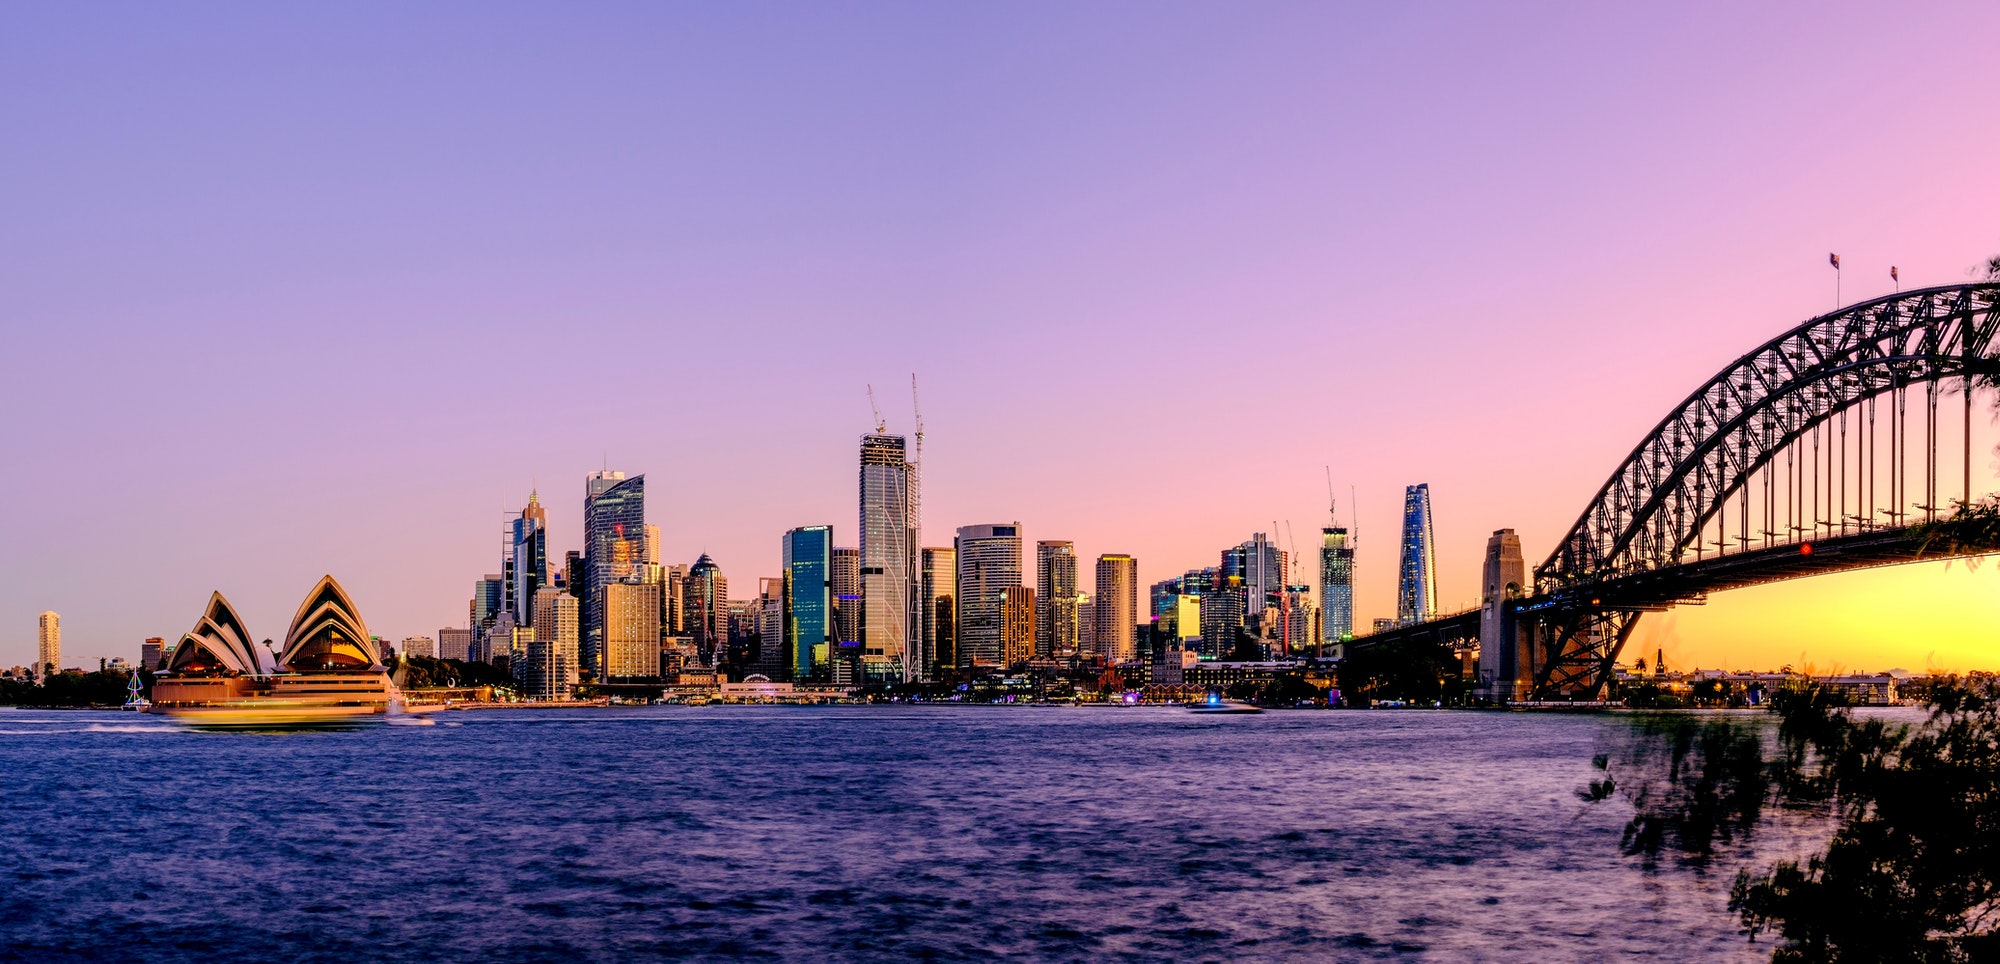 Panoramic view of the cityscape of the Sydney, Australia at sunset